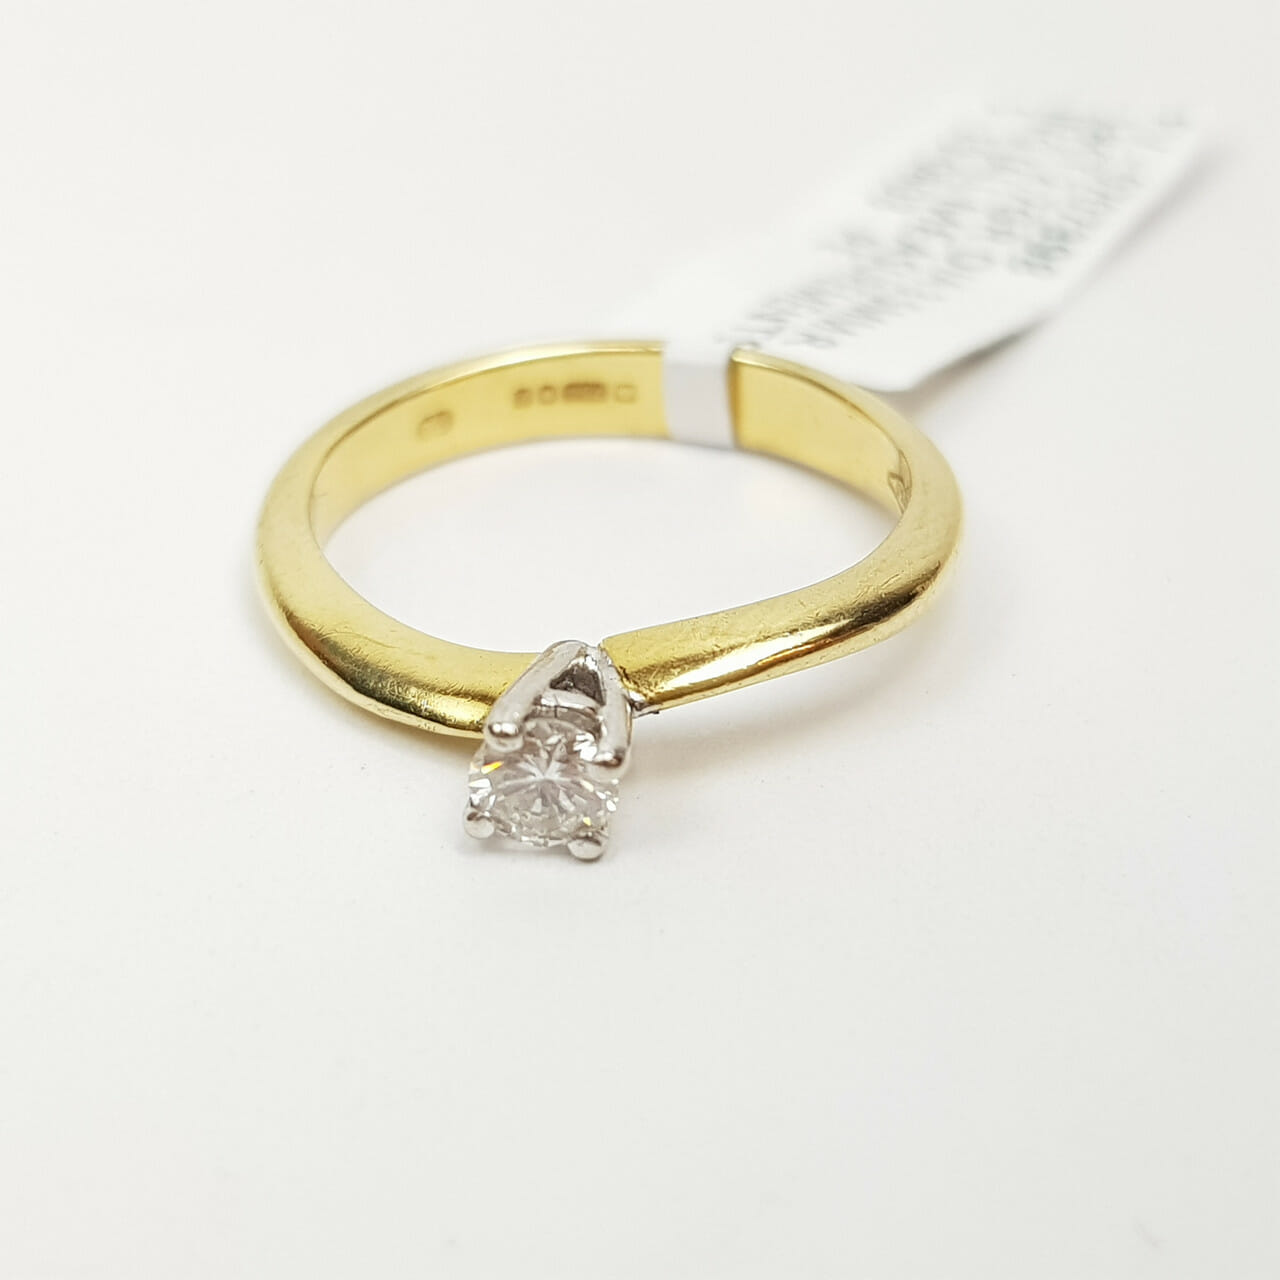 18CT 2.7GR YELLOW GOLD SOLITAIRE DIAMOND RING SIZE J #0707398